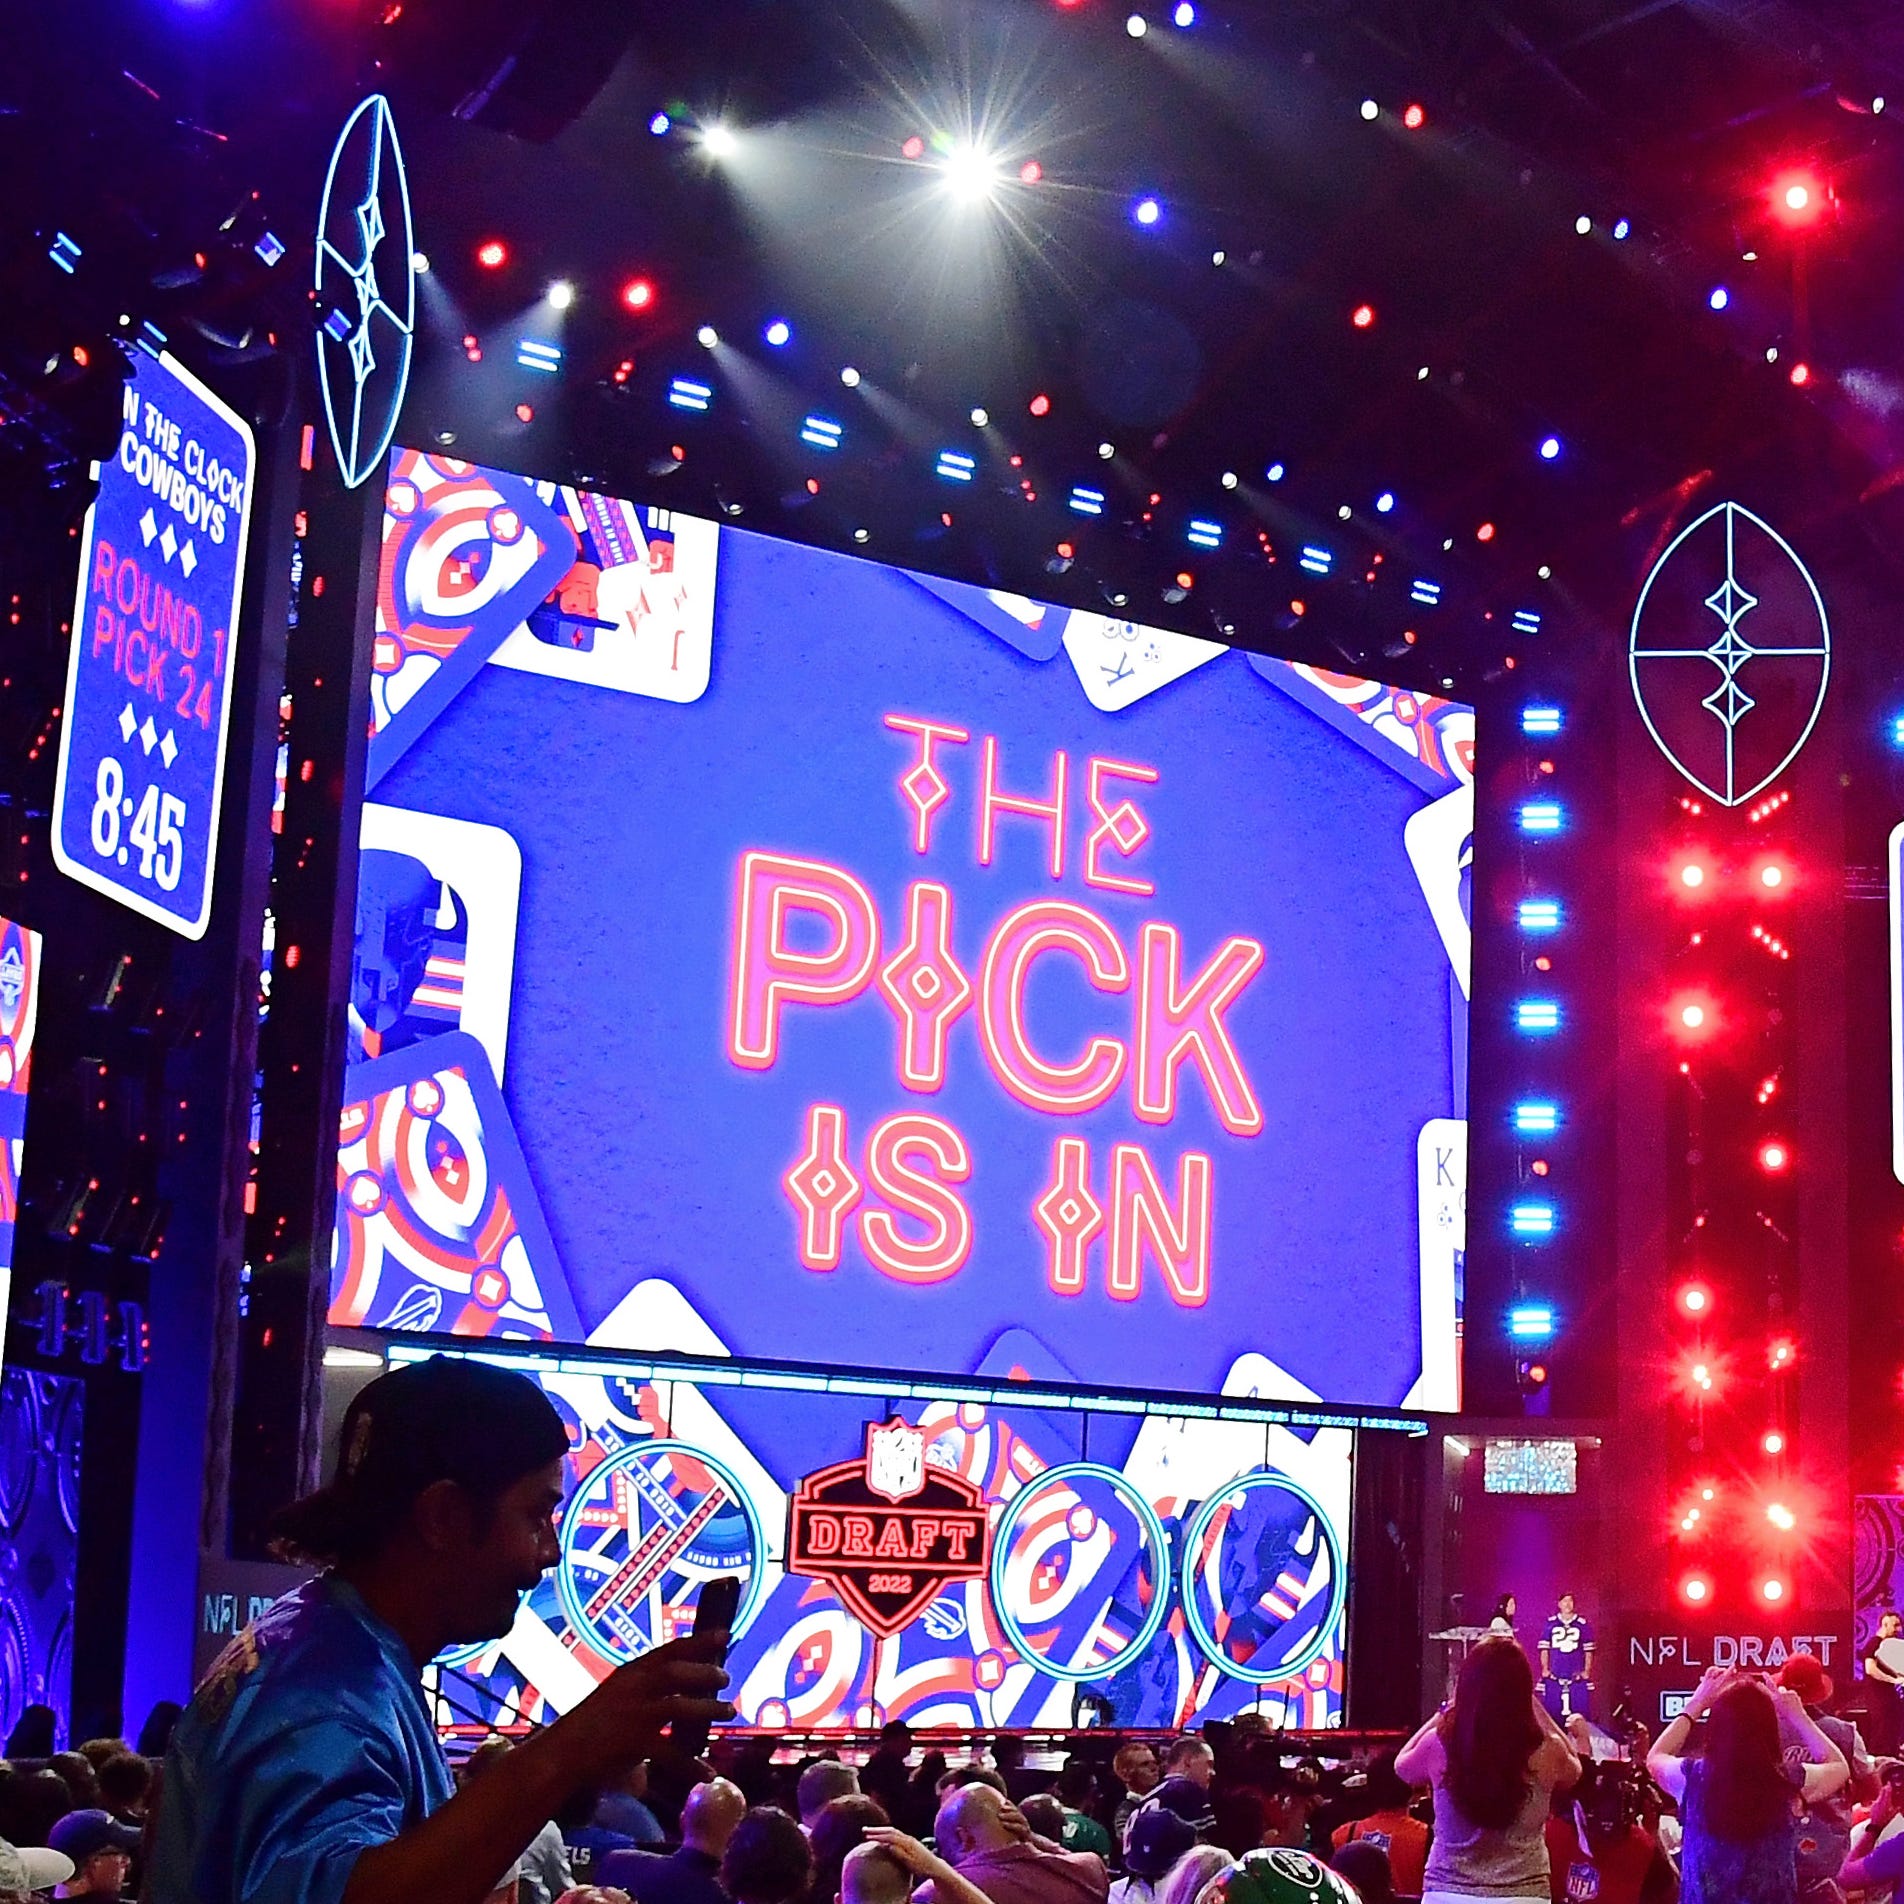 A general view during the first round of the 2022 NFL Draft at the NFL Draft Theater.